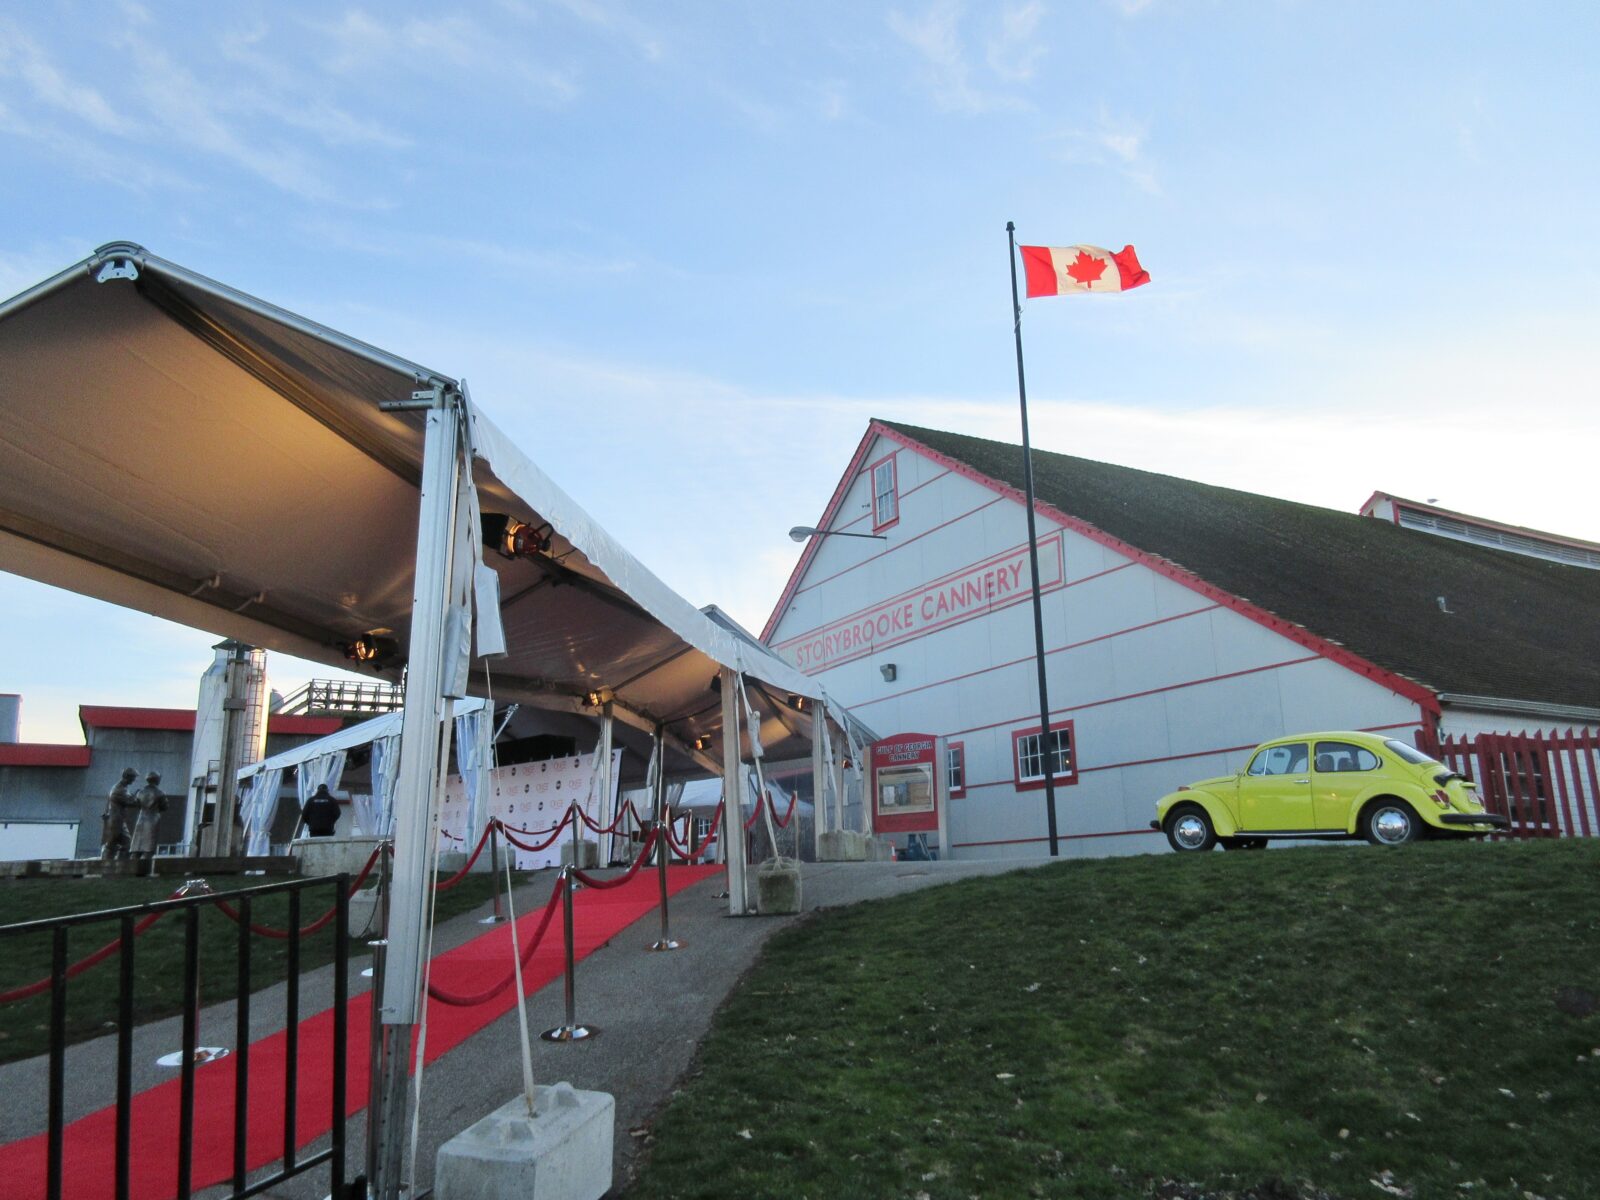 Red carpet set up in front of the cannery